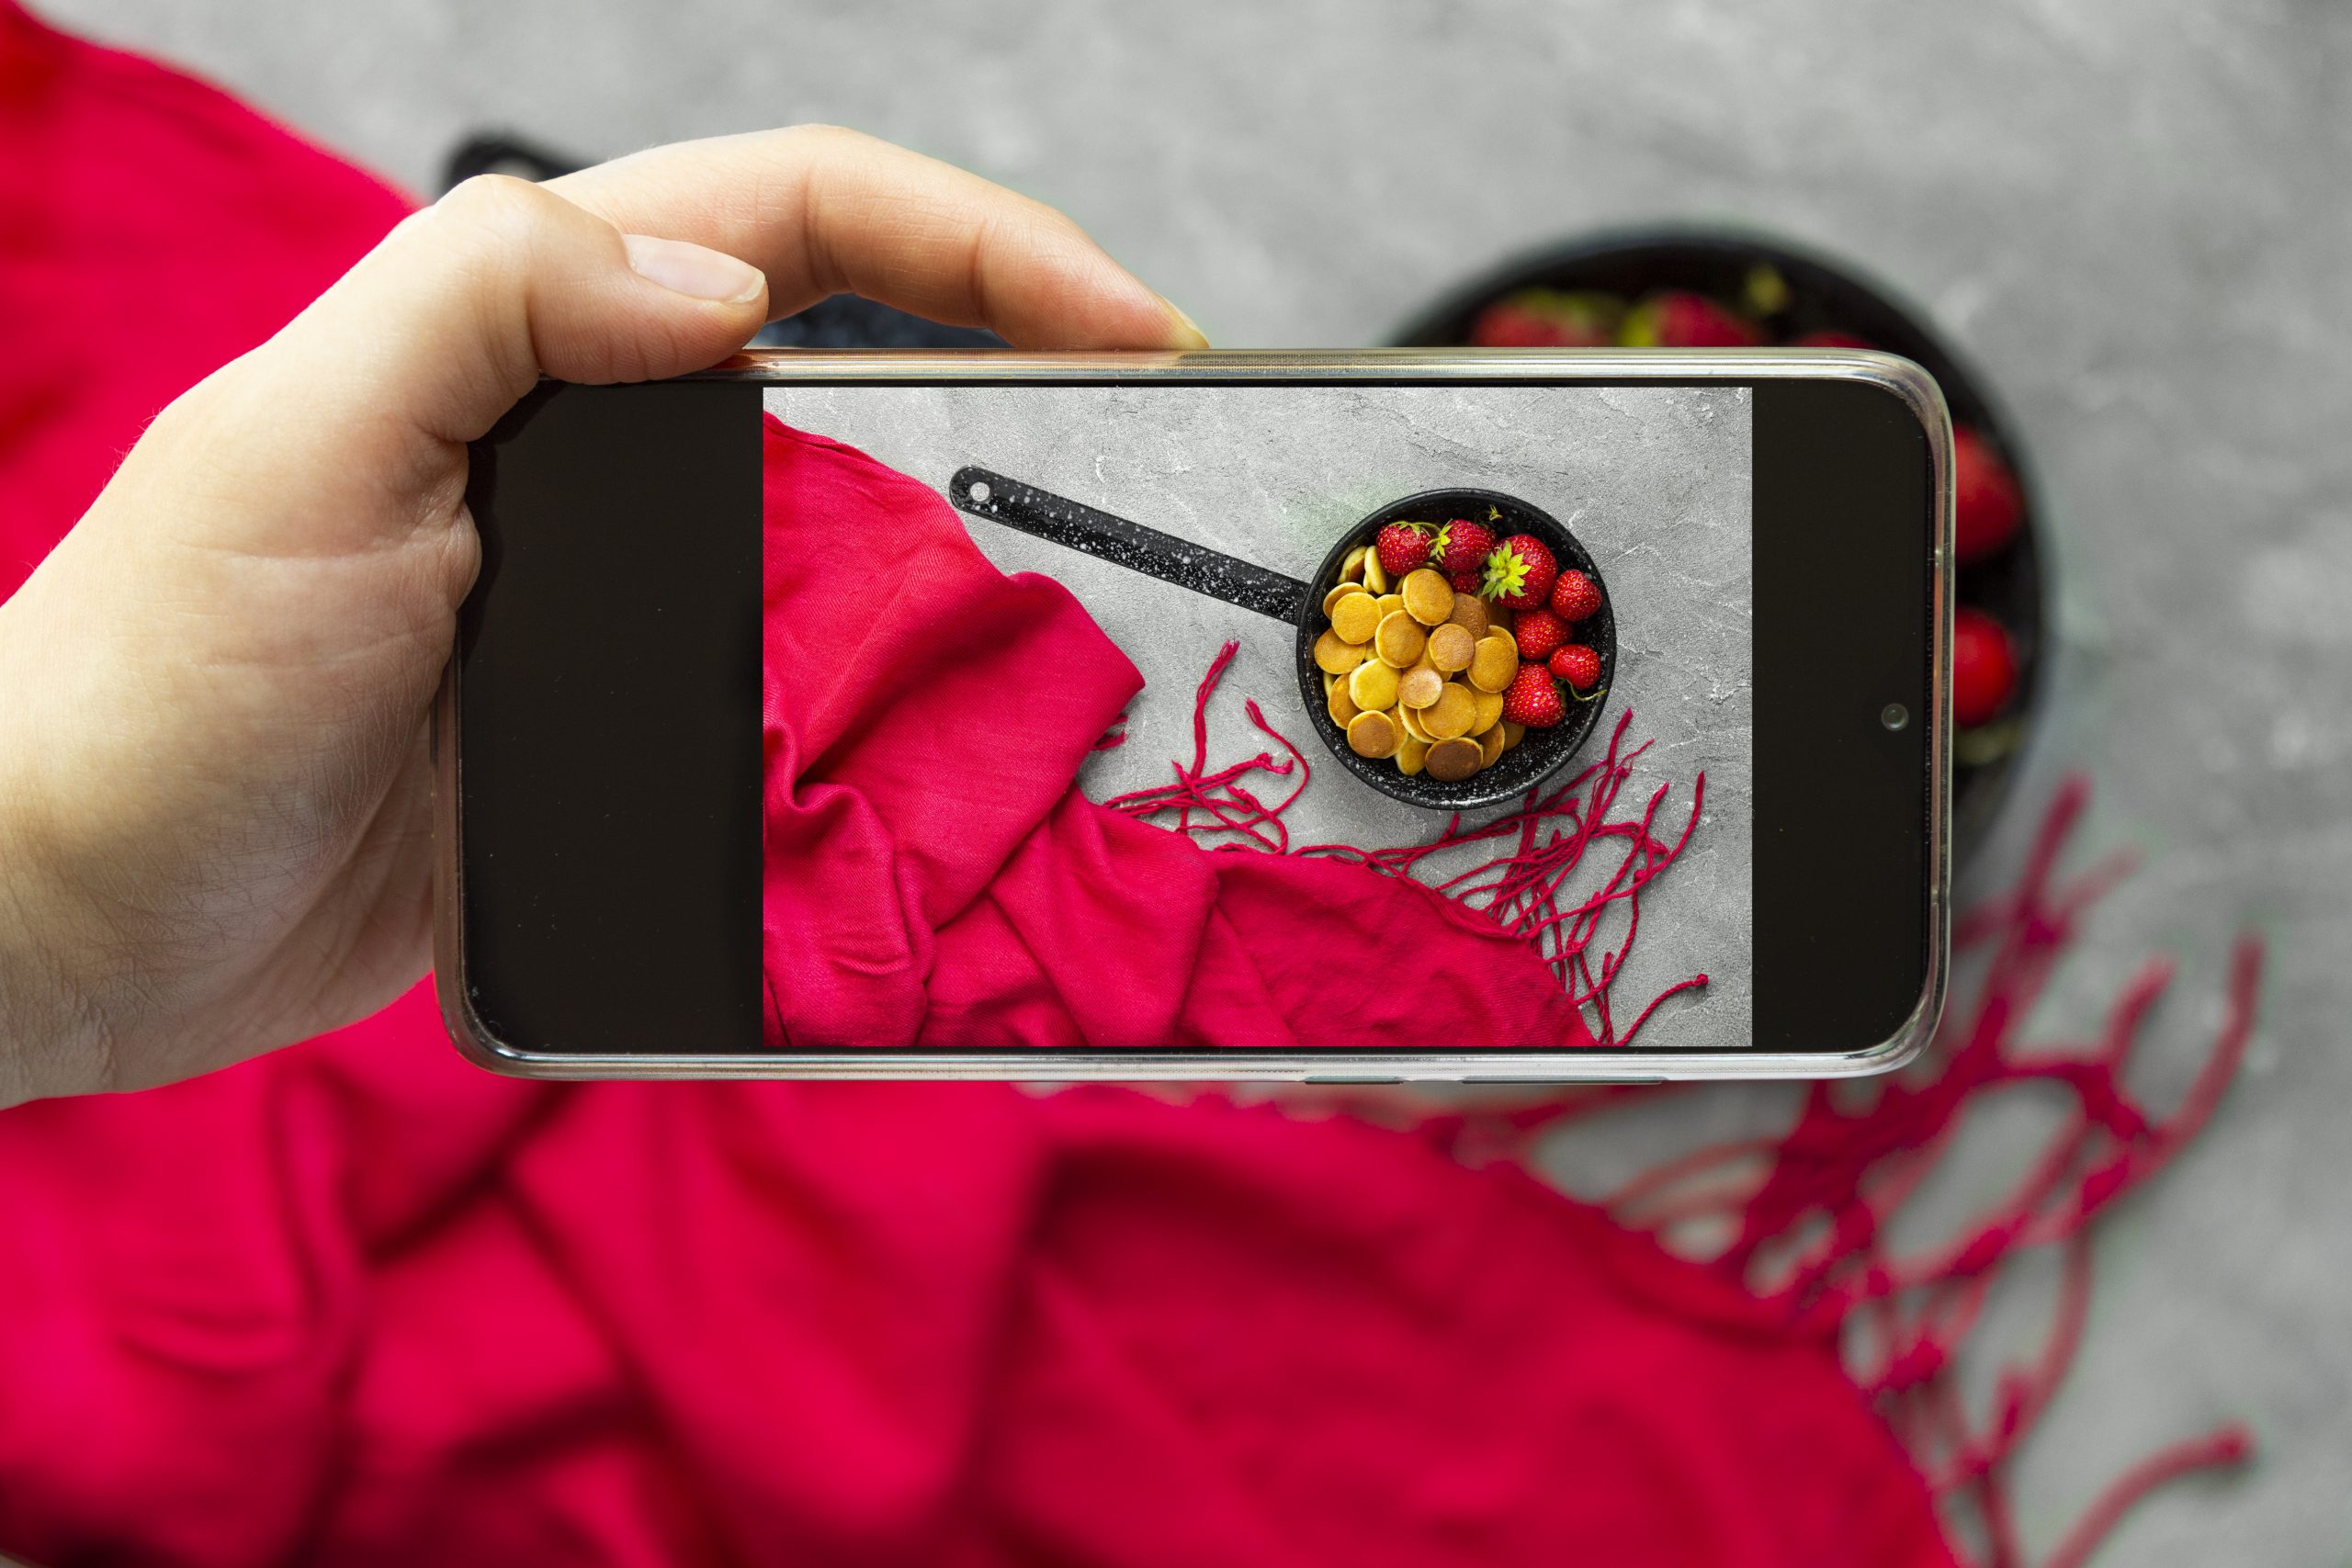 How to Take Attention Grabbing Product Photos with Smartphones?